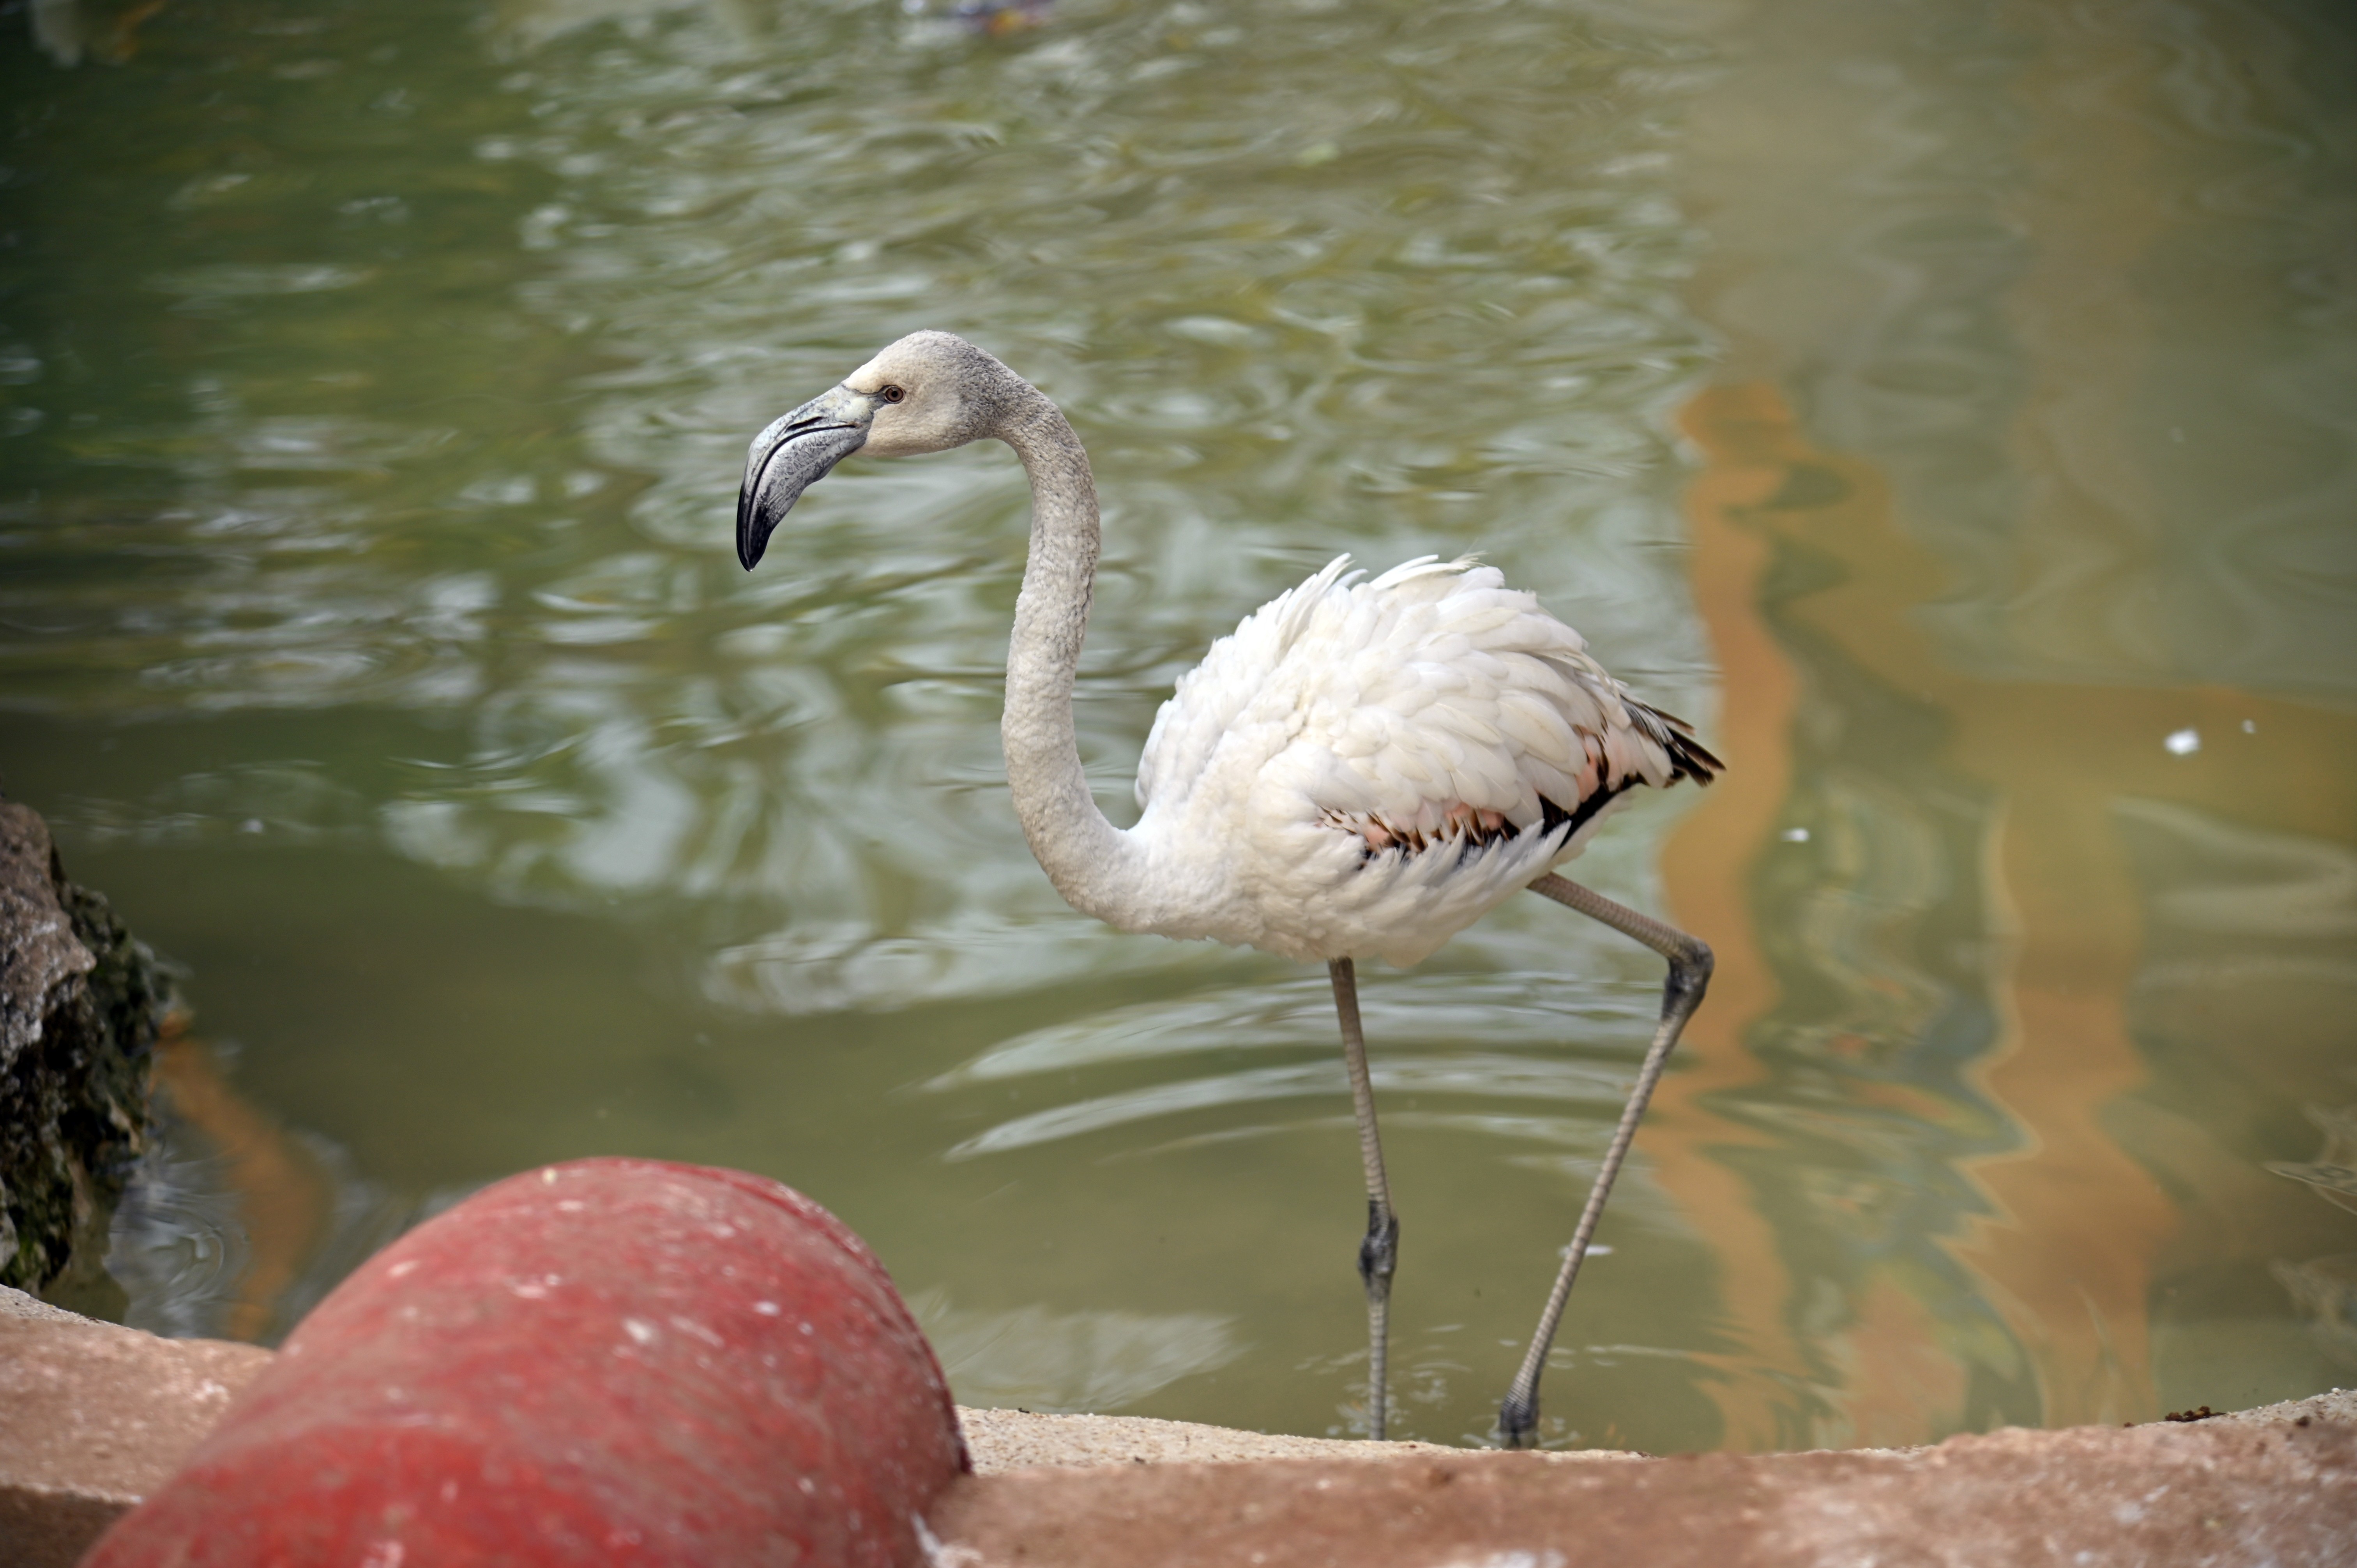 A Greater Flamingo